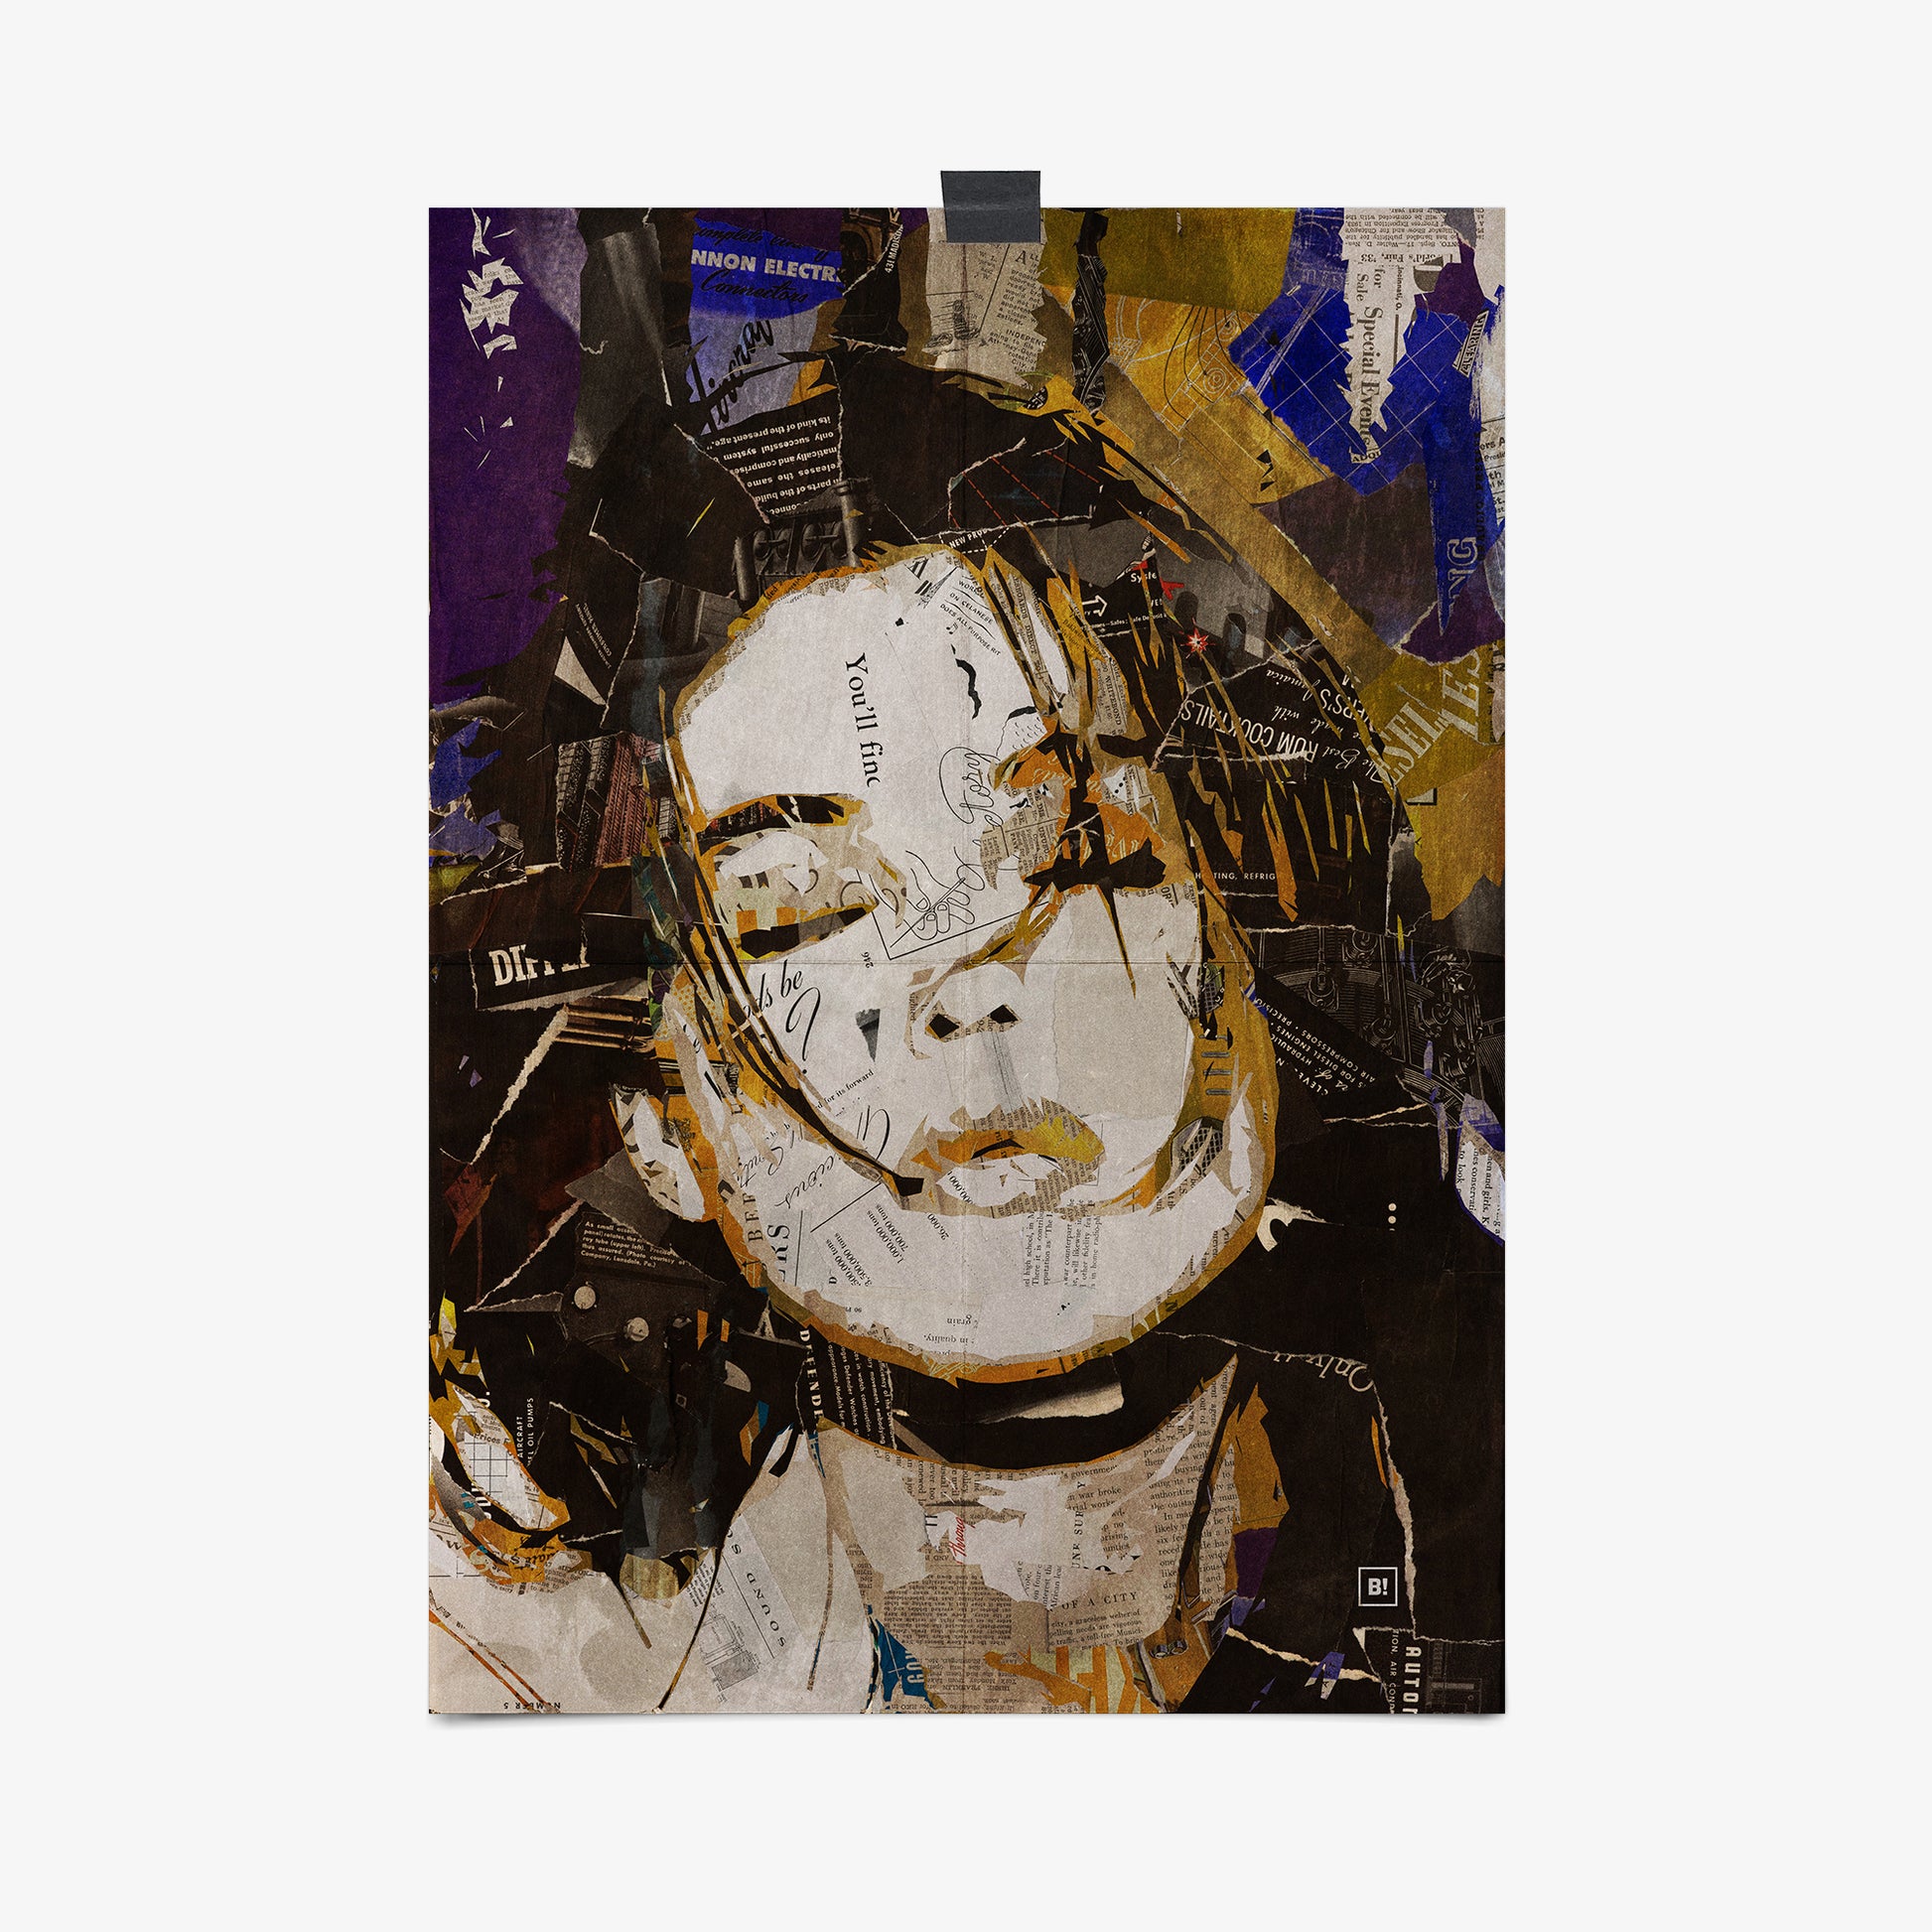 Be inspired by our iconic collage portrait art print of Monica Bellucci. This artwork was printed using the giclée process on archival acid-free paper, capturing its timeless beauty in every detail.